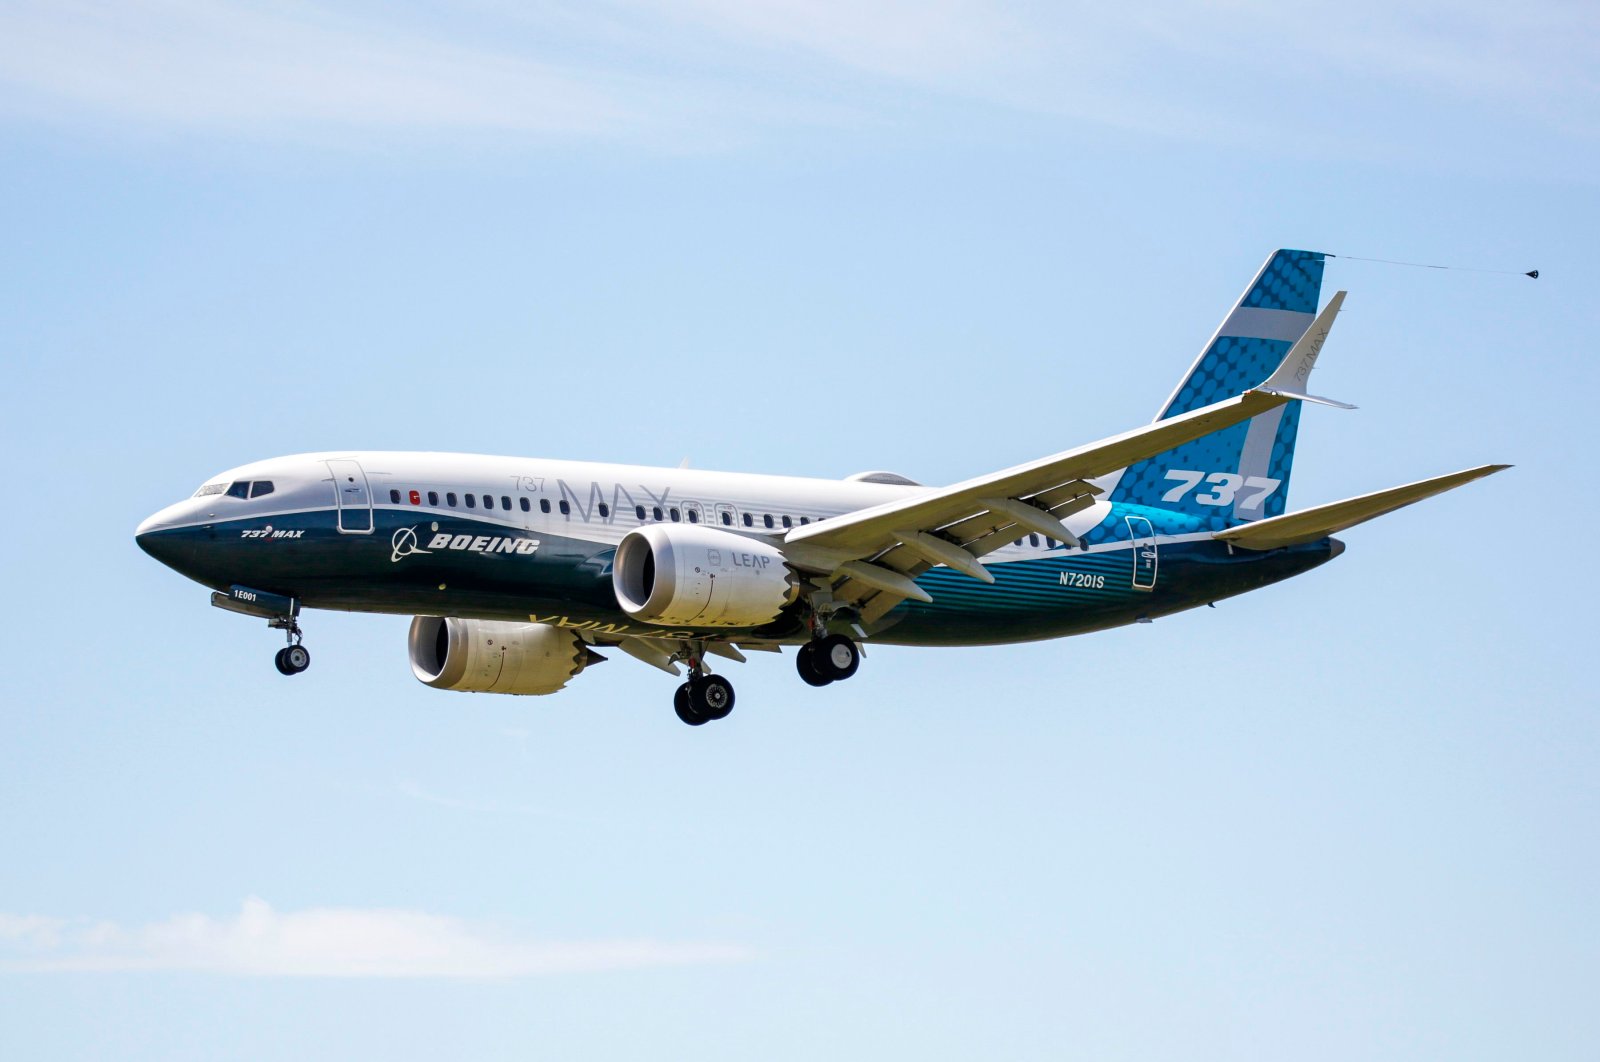 A Boeing 737 Max jet comes in for a landing following a Federal Aviation Administration (FAA) test flight at Boeing Field in Seattle, Washington D.C., June 29, 2020 (AFP Photo)